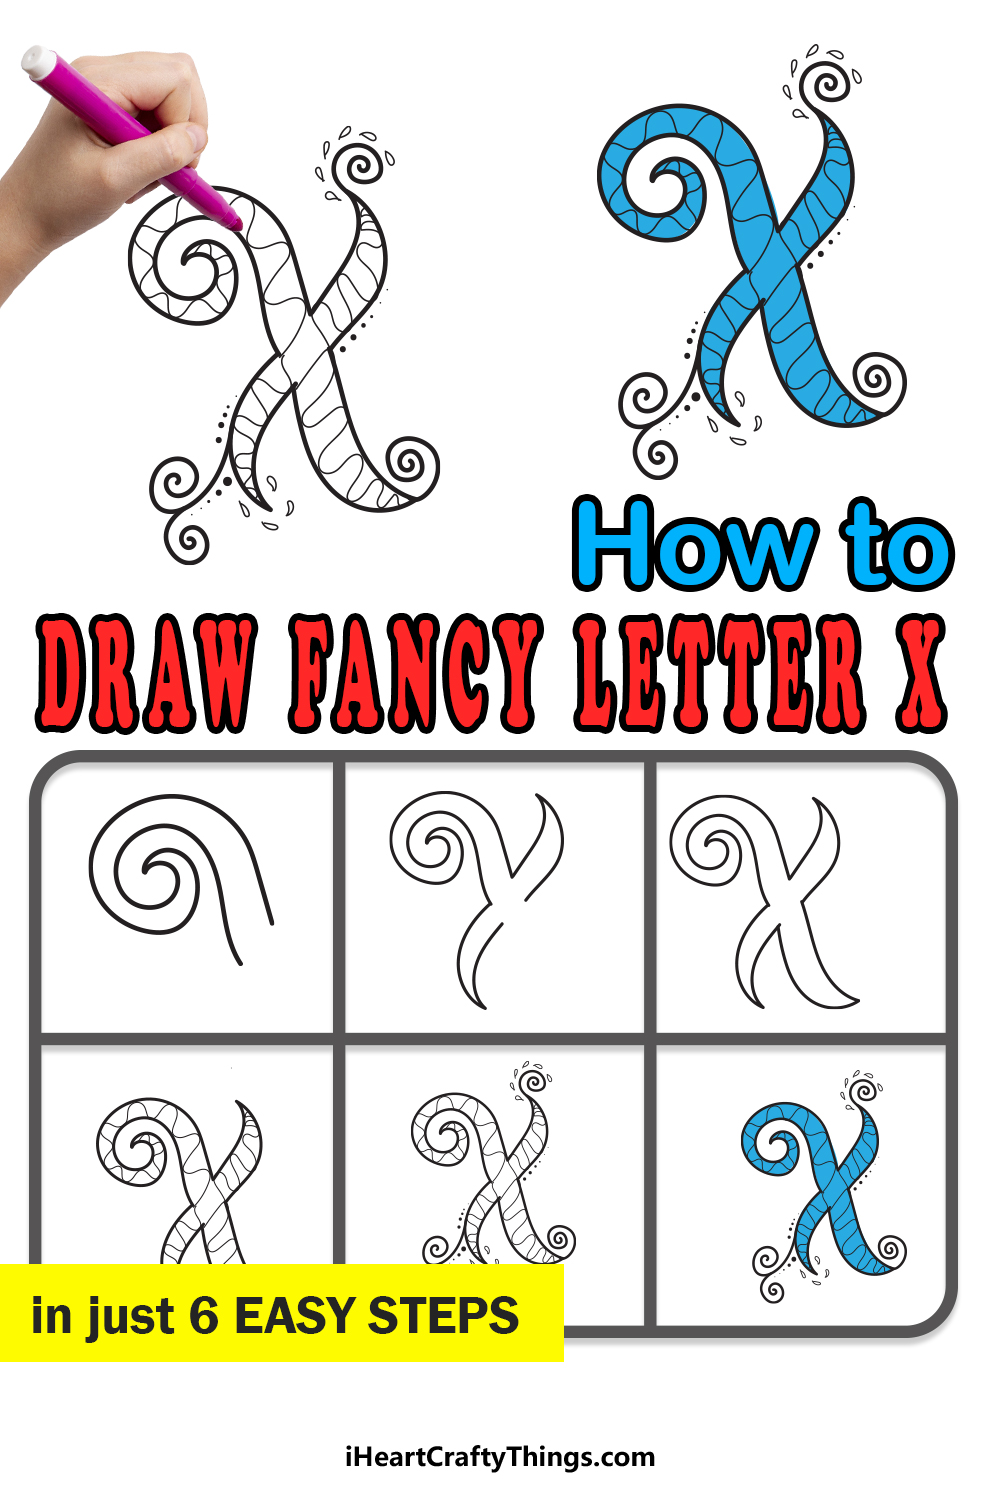 How To Draw Your Own Fancy X step by step guide